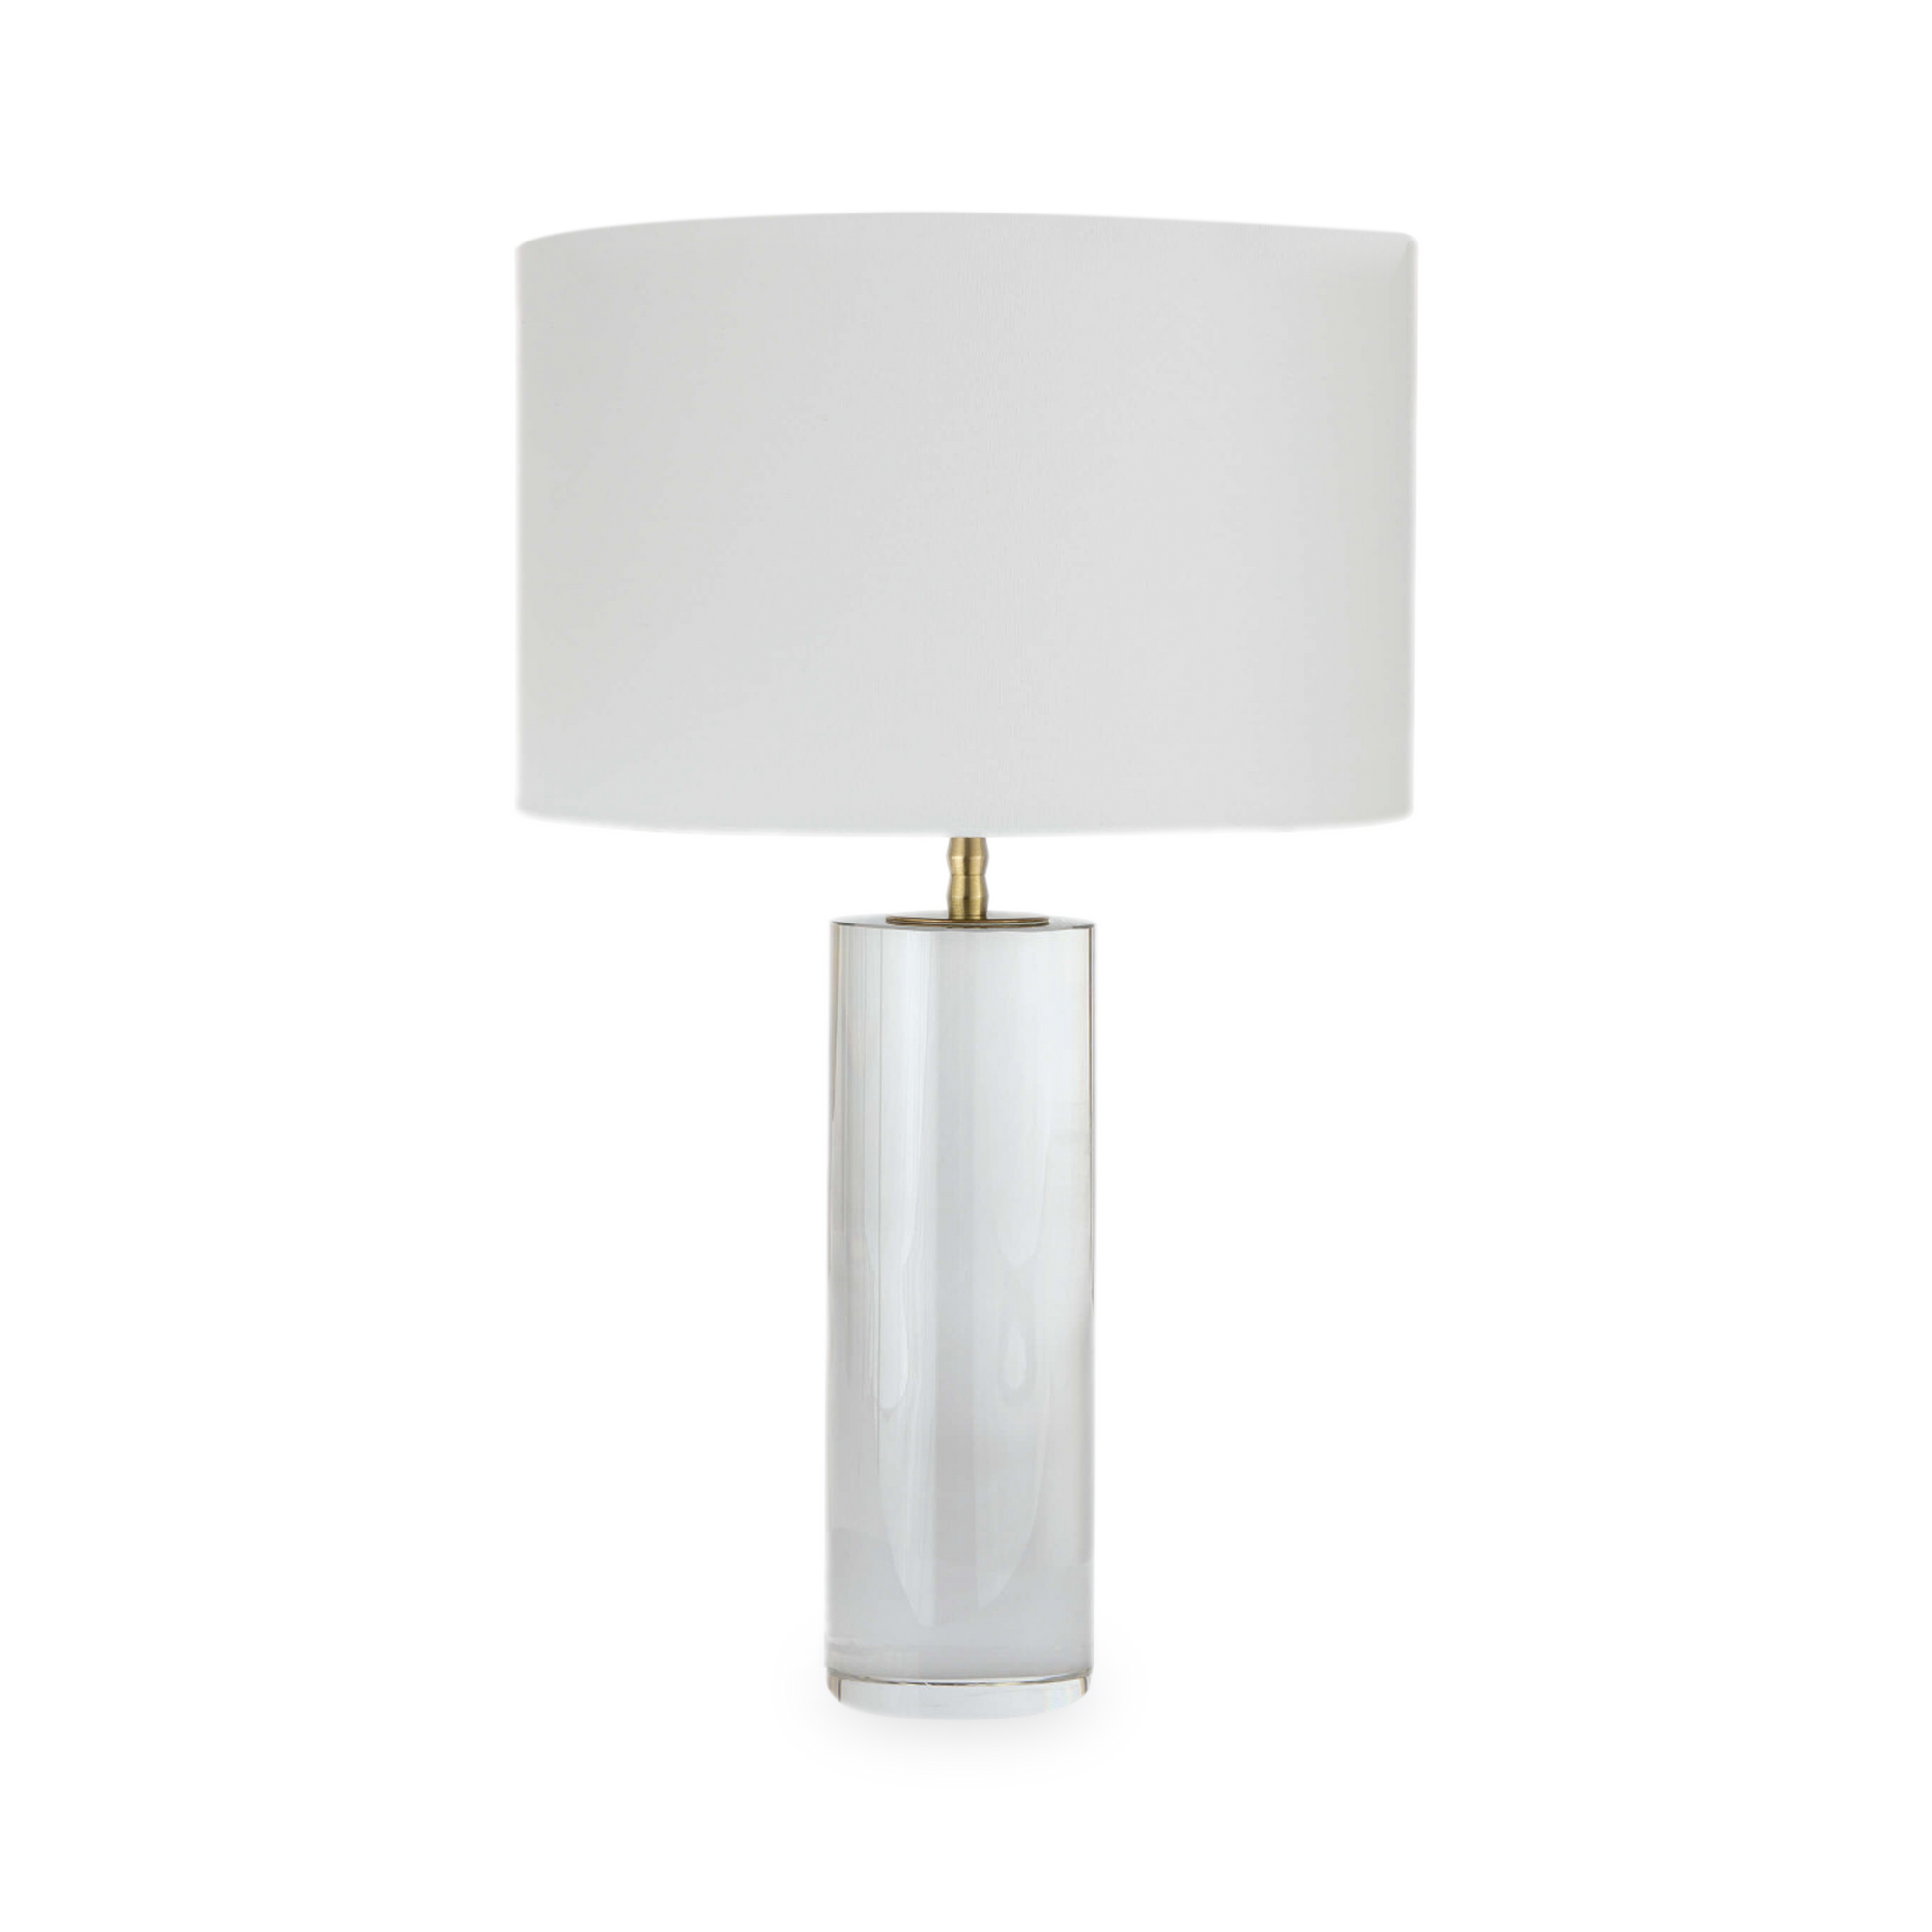 This solid crystal cylinder lamp base features a sleek silhouette and uniquely designed natural brass neck.